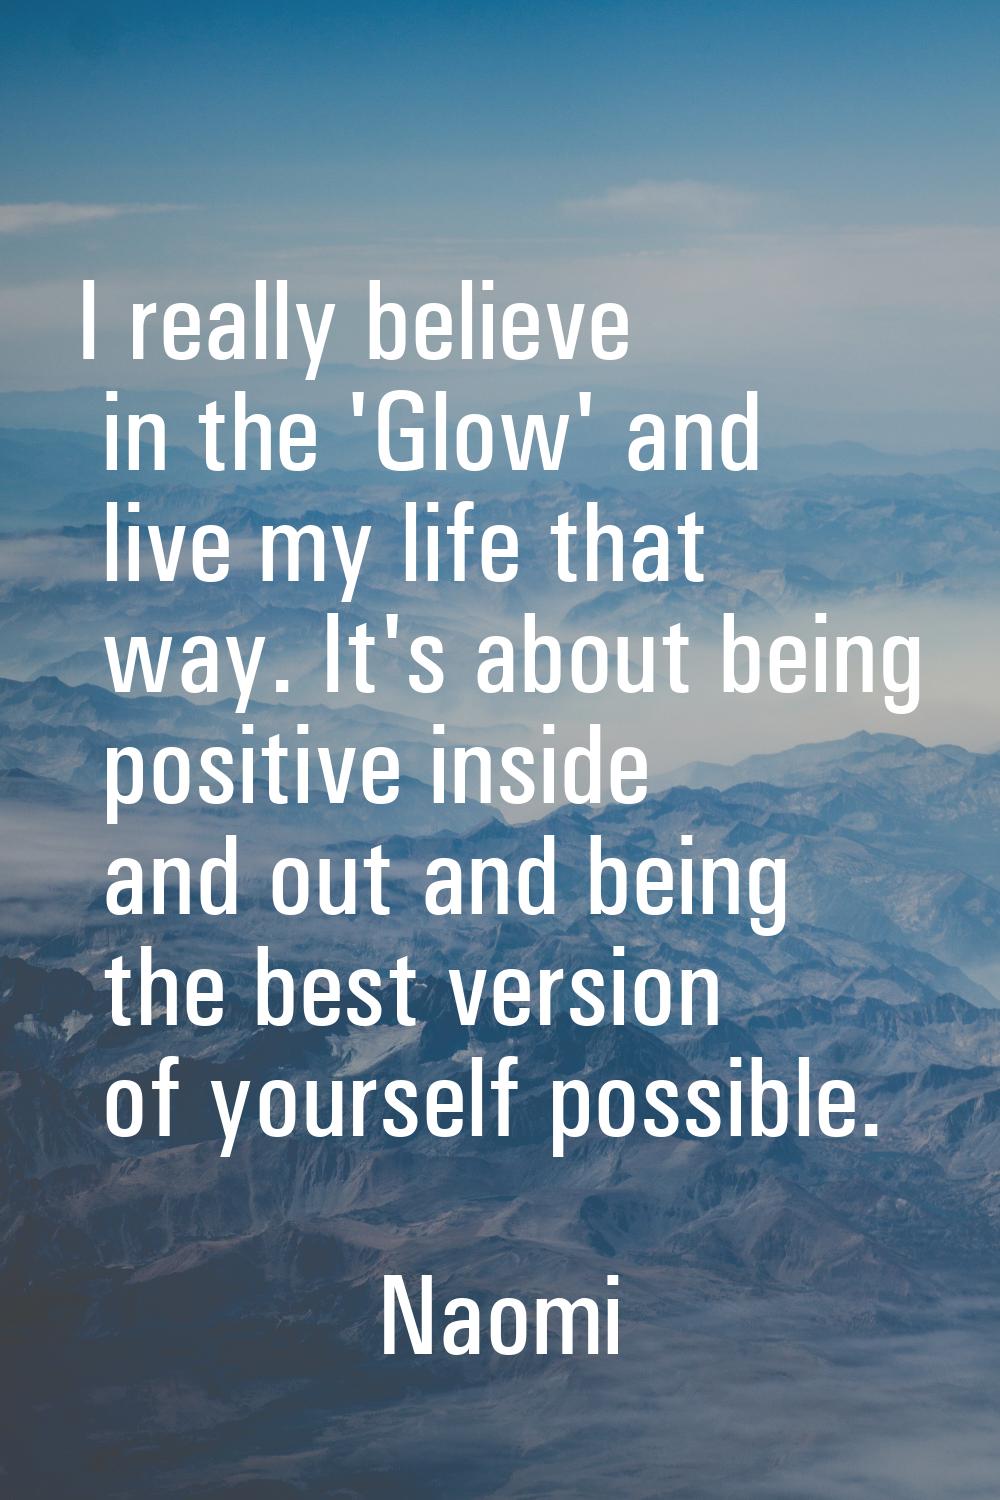 I really believe in the 'Glow' and live my life that way. It's about being positive inside and out 